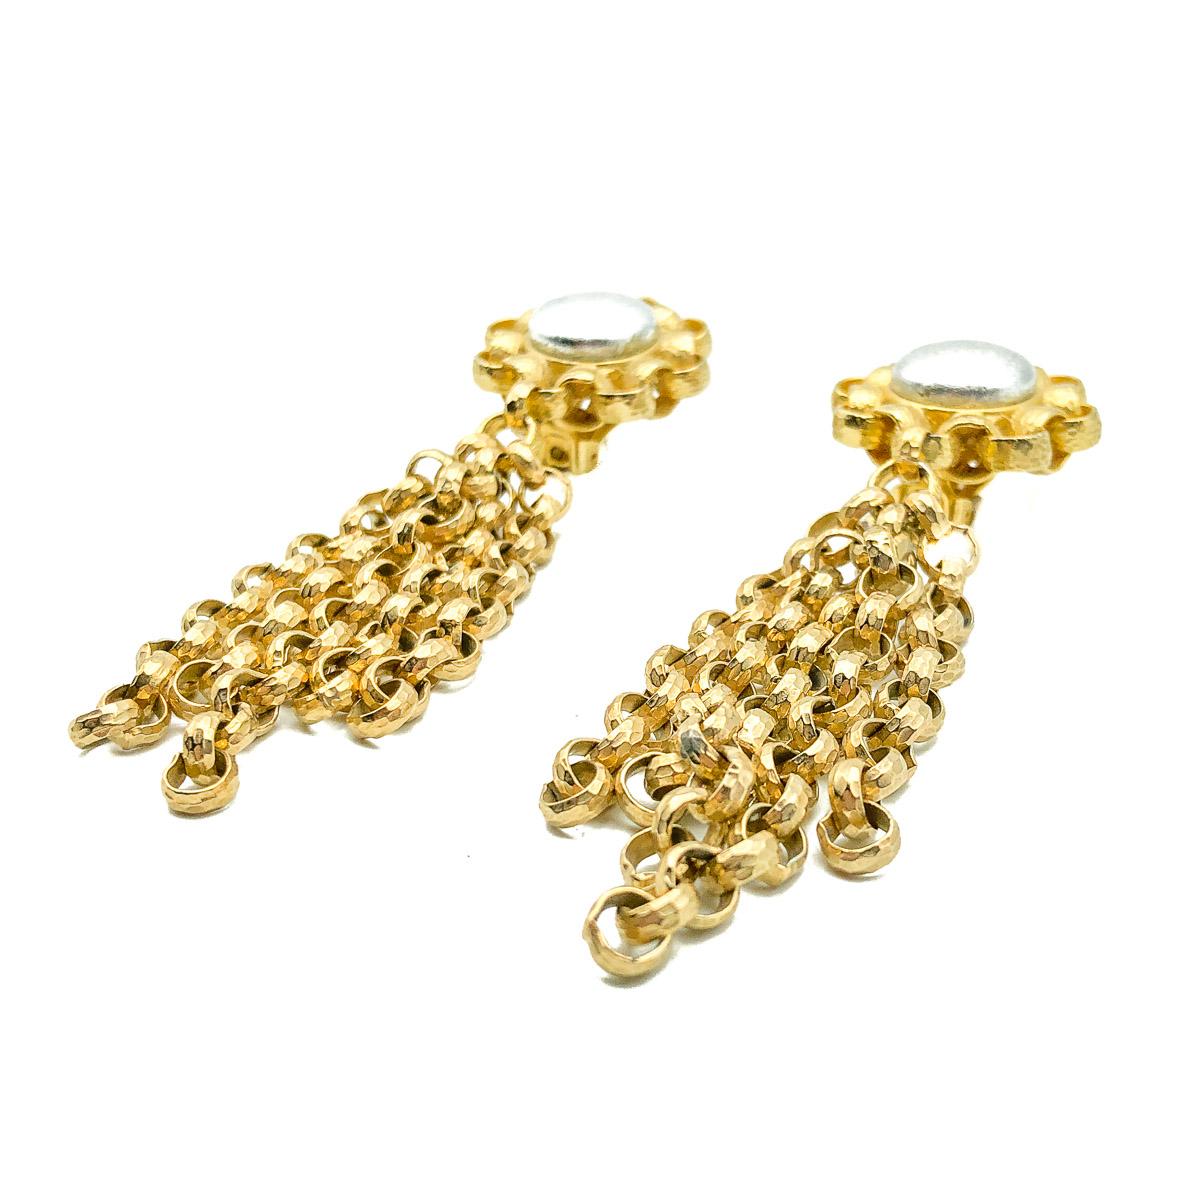 A strikingly cool pair of Vintage Ellen Designs Tassle Earrings. Crafted in gold plated metal and silver leather. Ellen Designs was created by Ellen, the daughter of the successful mid-century American costume jewellery brand 'Robert Originals'. In